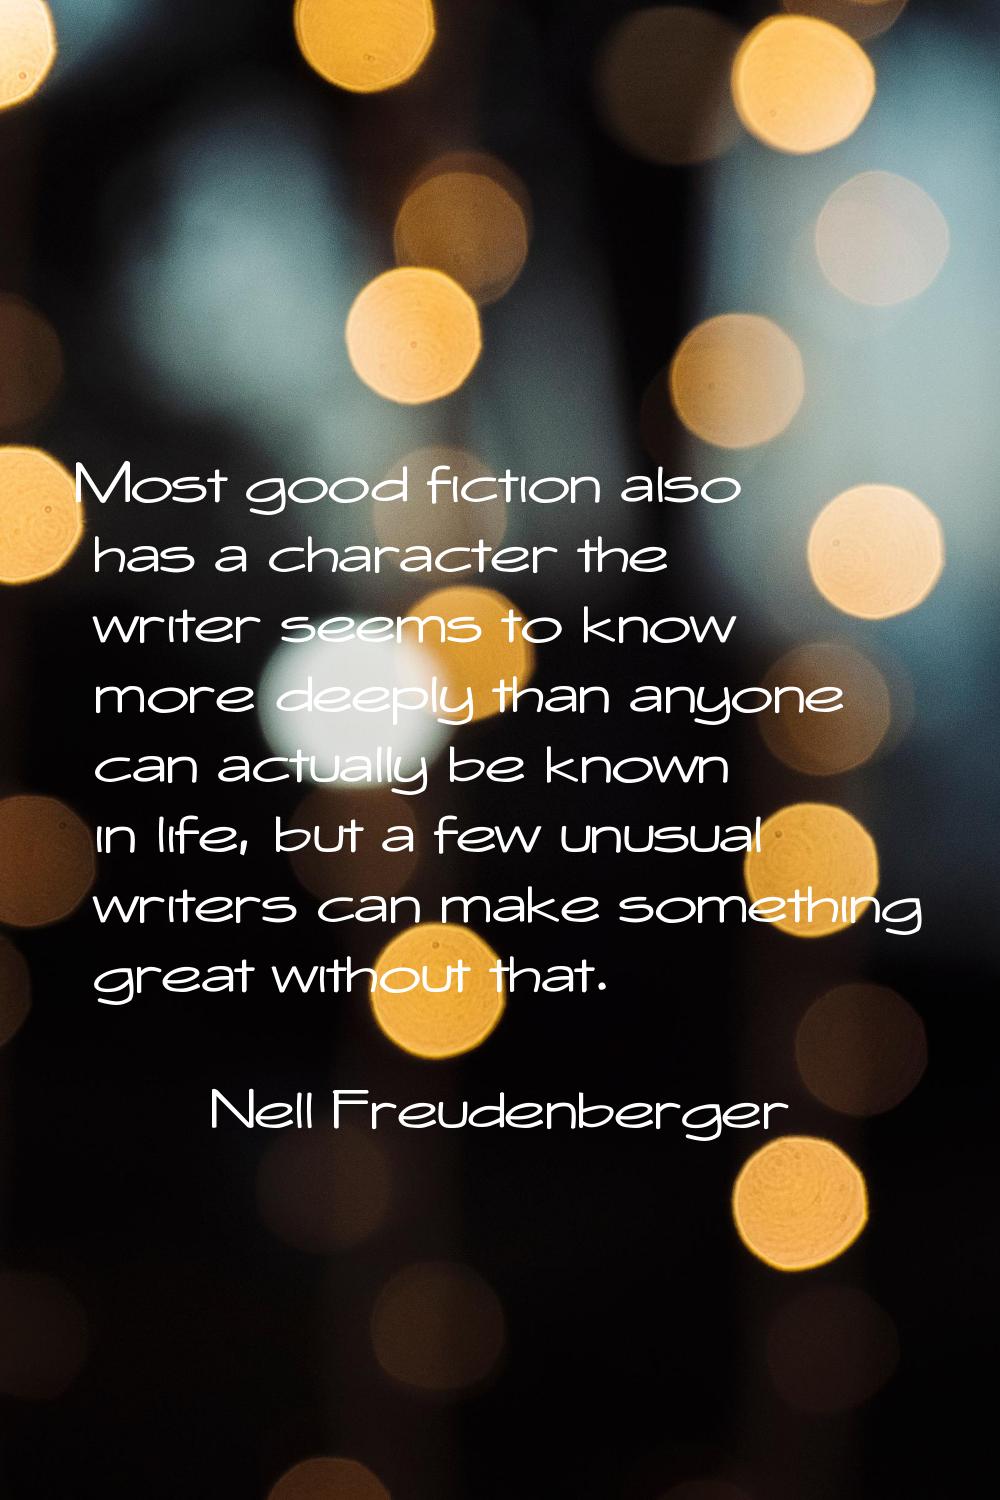 Most good fiction also has a character the writer seems to know more deeply than anyone can actuall